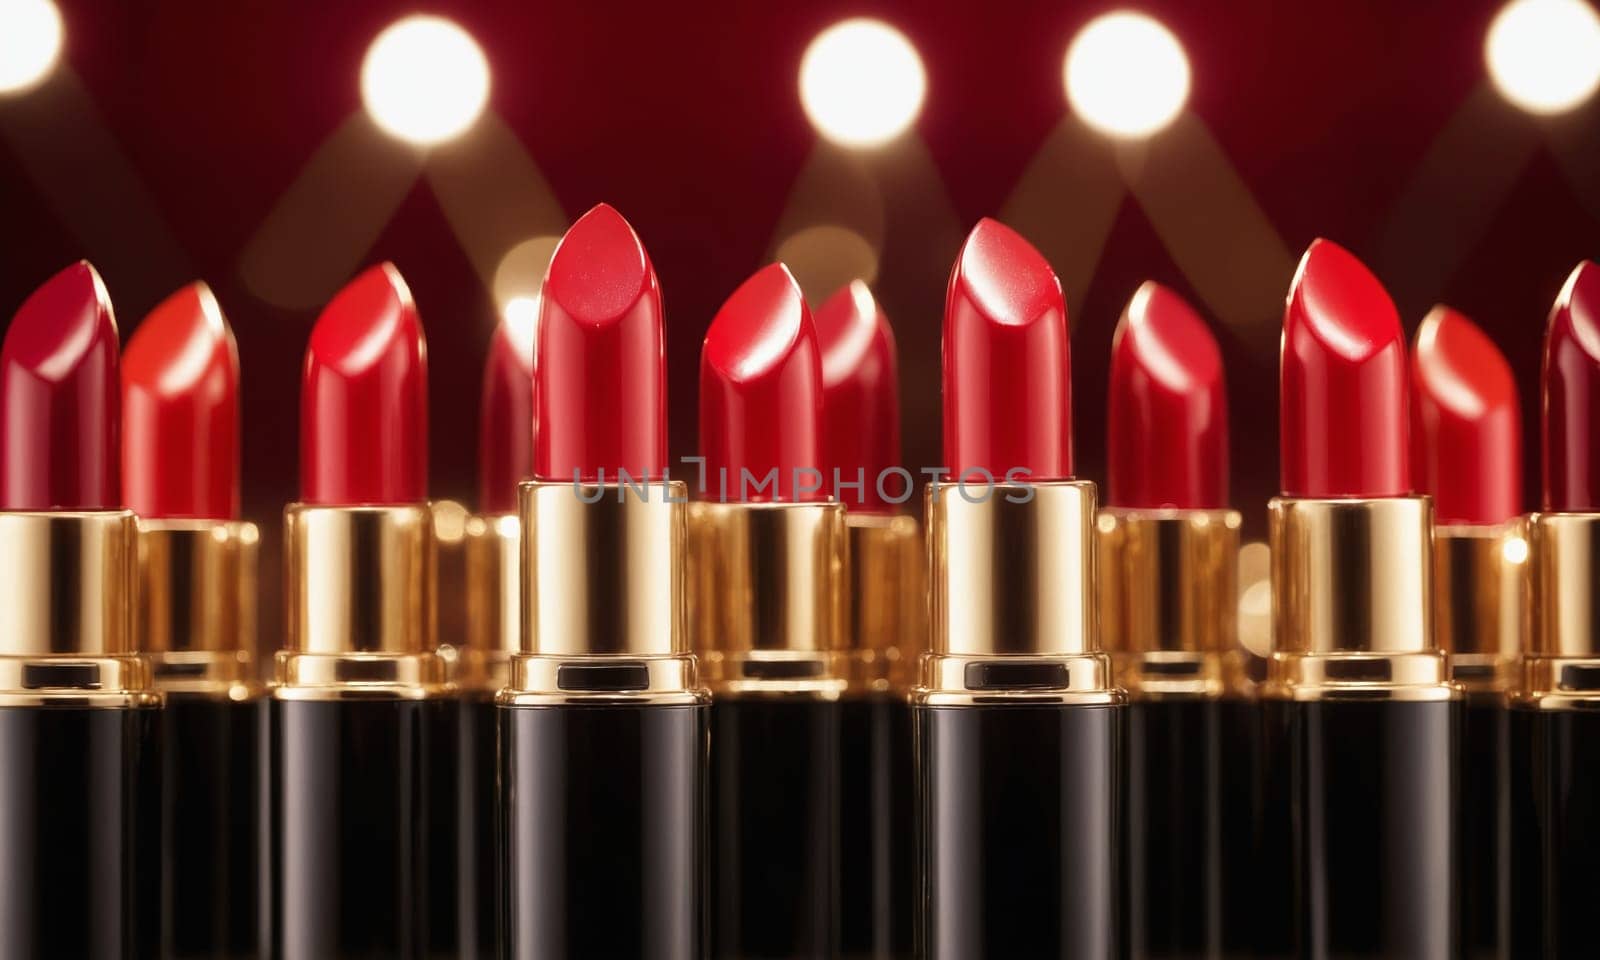 Lipsticks on black background, closeup view. Cosmetic products.